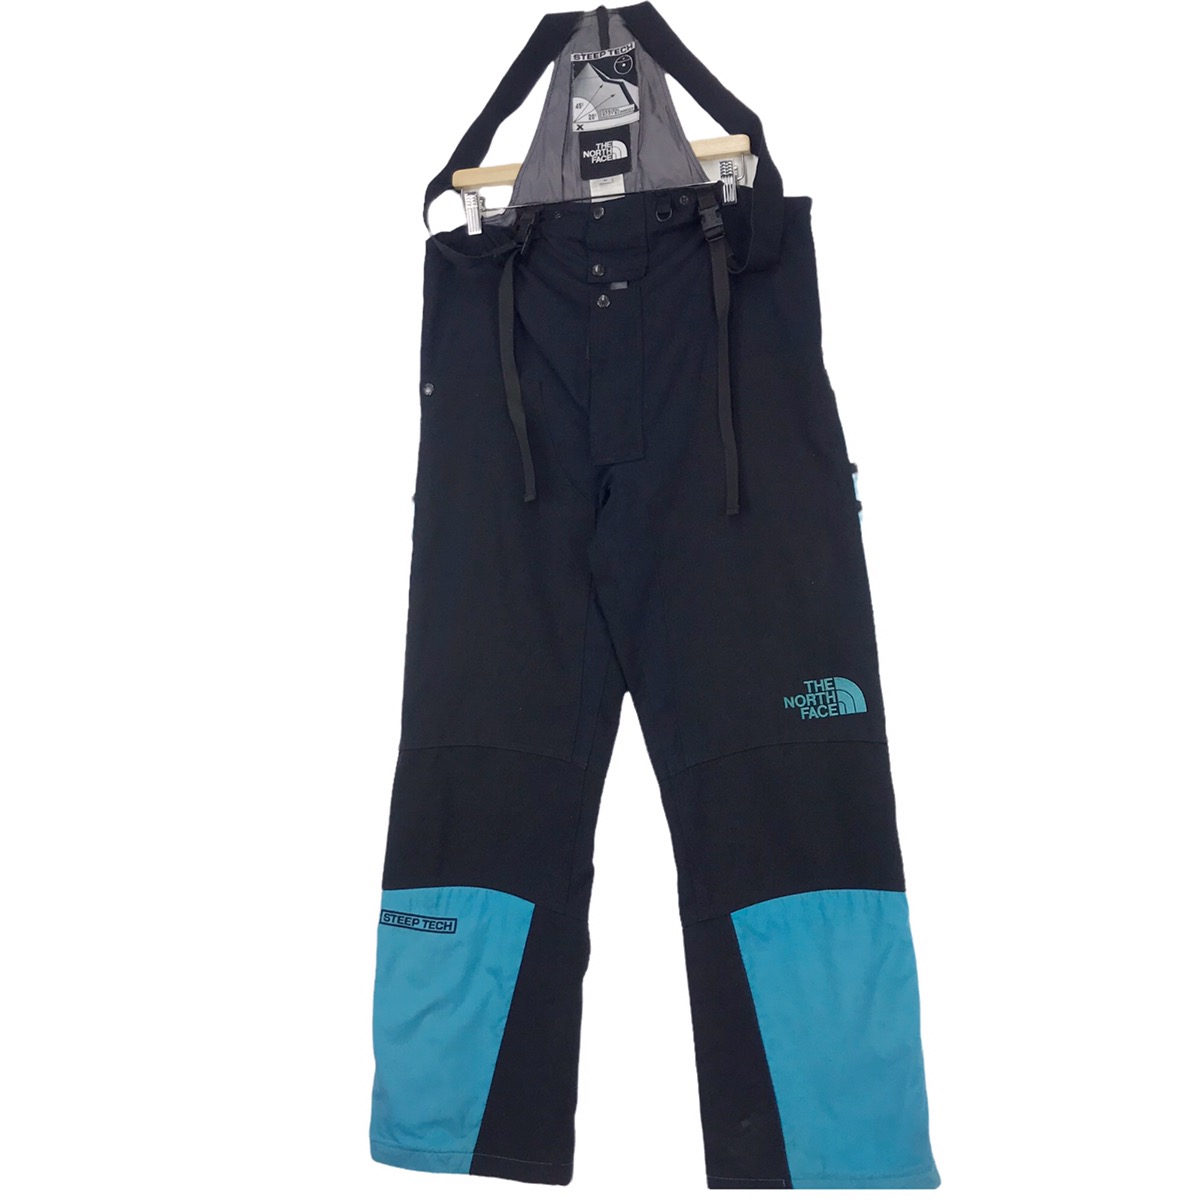 Outdoor Style Go Out! - Vintage The North Face Steep Tech Jumpsuits Ski Pants - 2